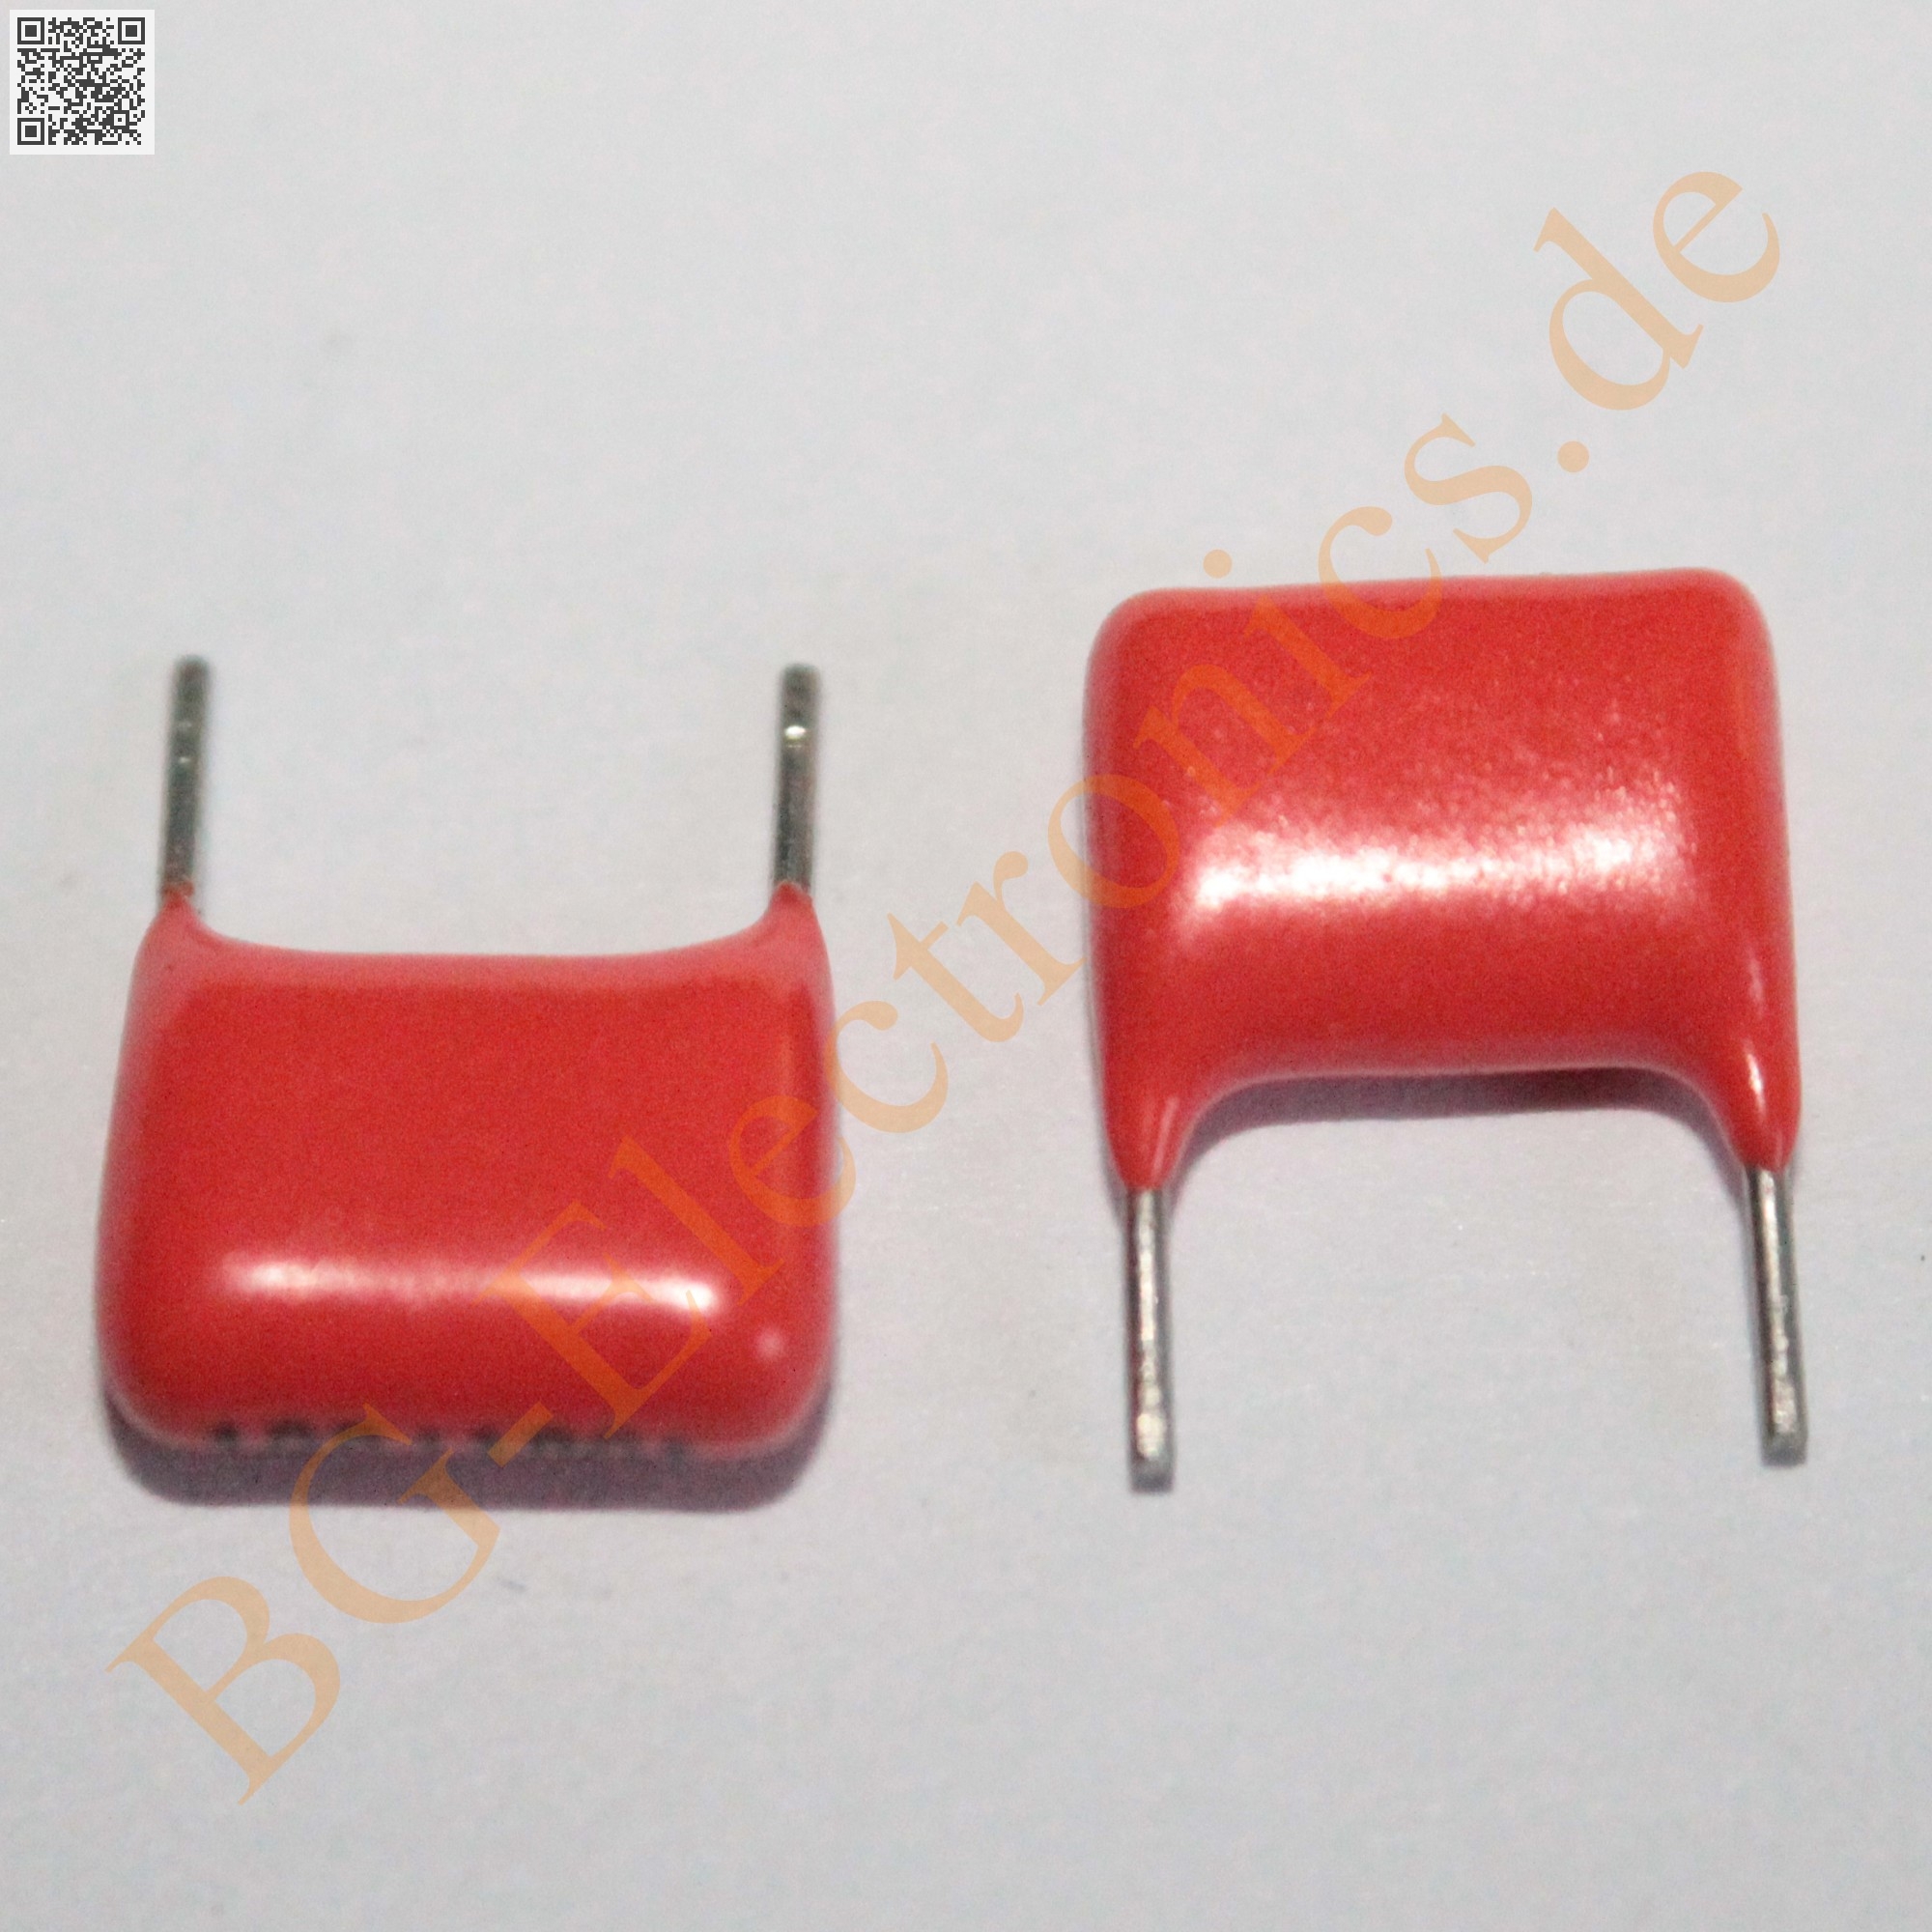 FO-R 0.100uF / 100V / RM7,5